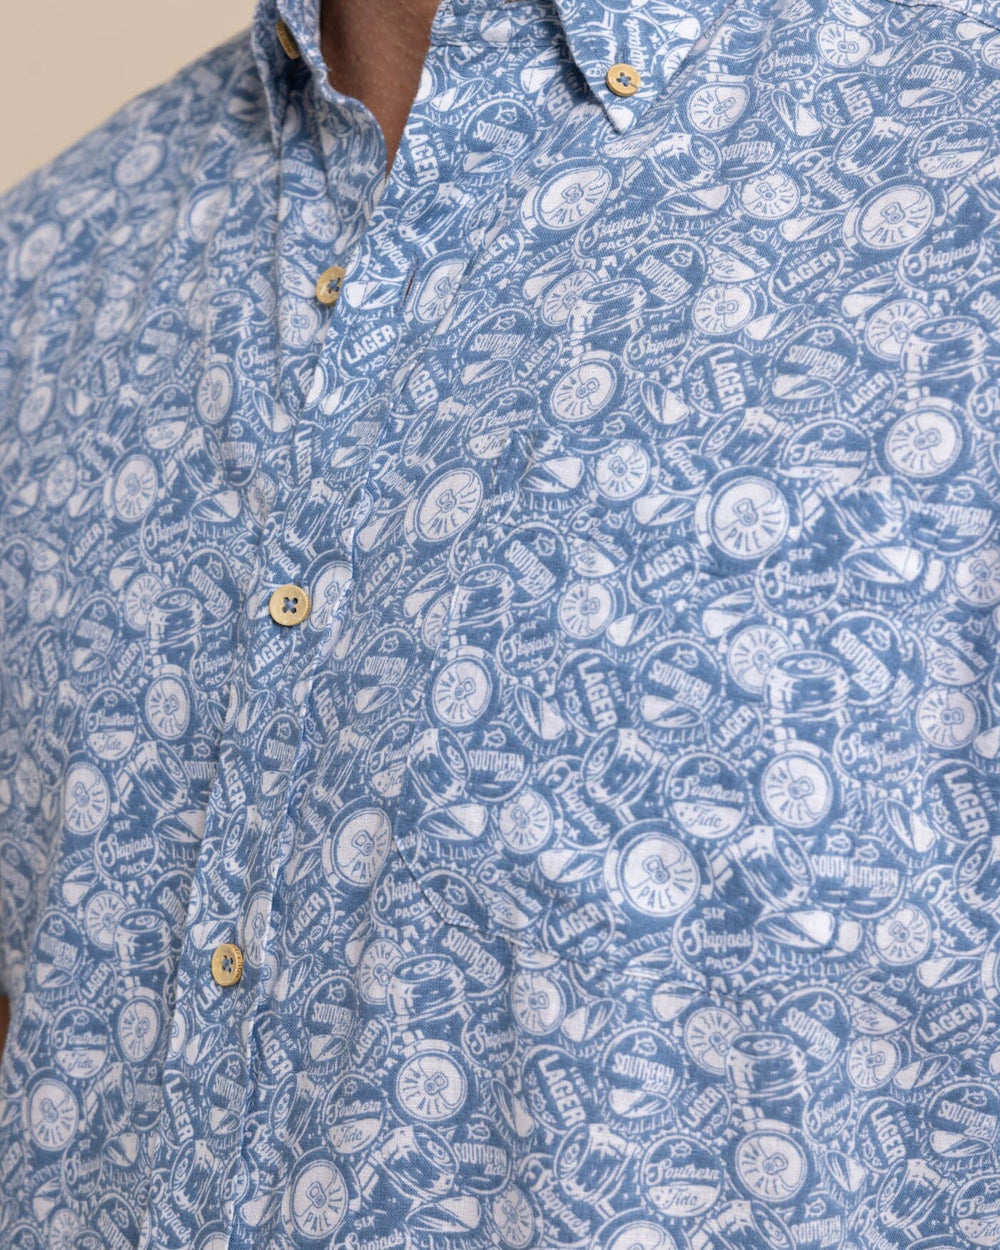 The detail view of the Southern Tide Linen Rayon Caps Off Short Sleeve Sport Shirt by Southern Tide - Coronet Blue